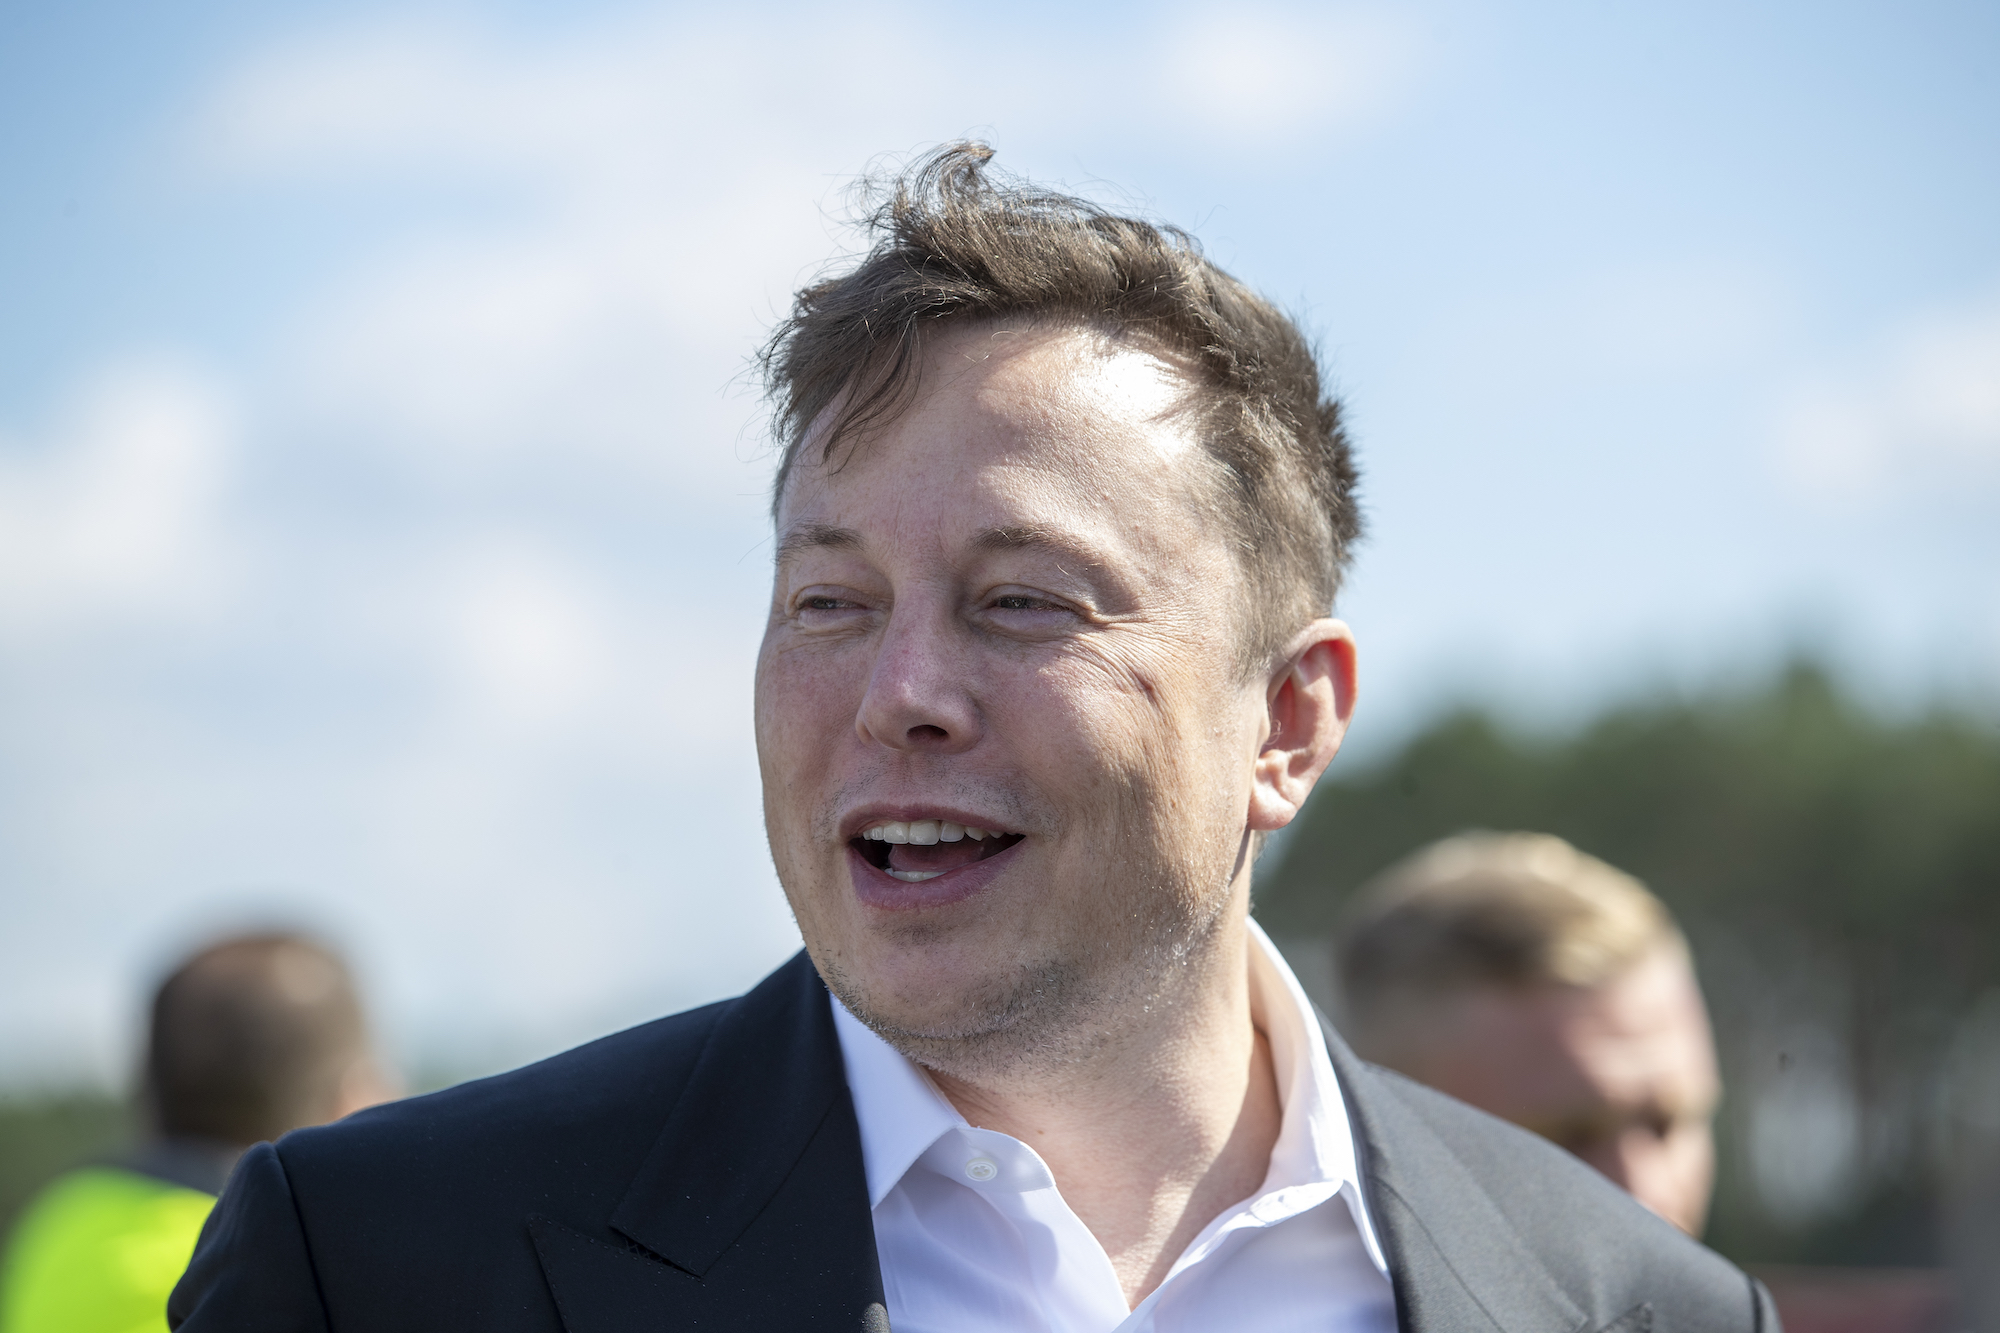 Tesla head Elon Musk talks to the press as he arrives to to have a look at the construction site of the new Tesla Gigafactory near Berlin on September 03, 2020, near Gruenheide, Germany.